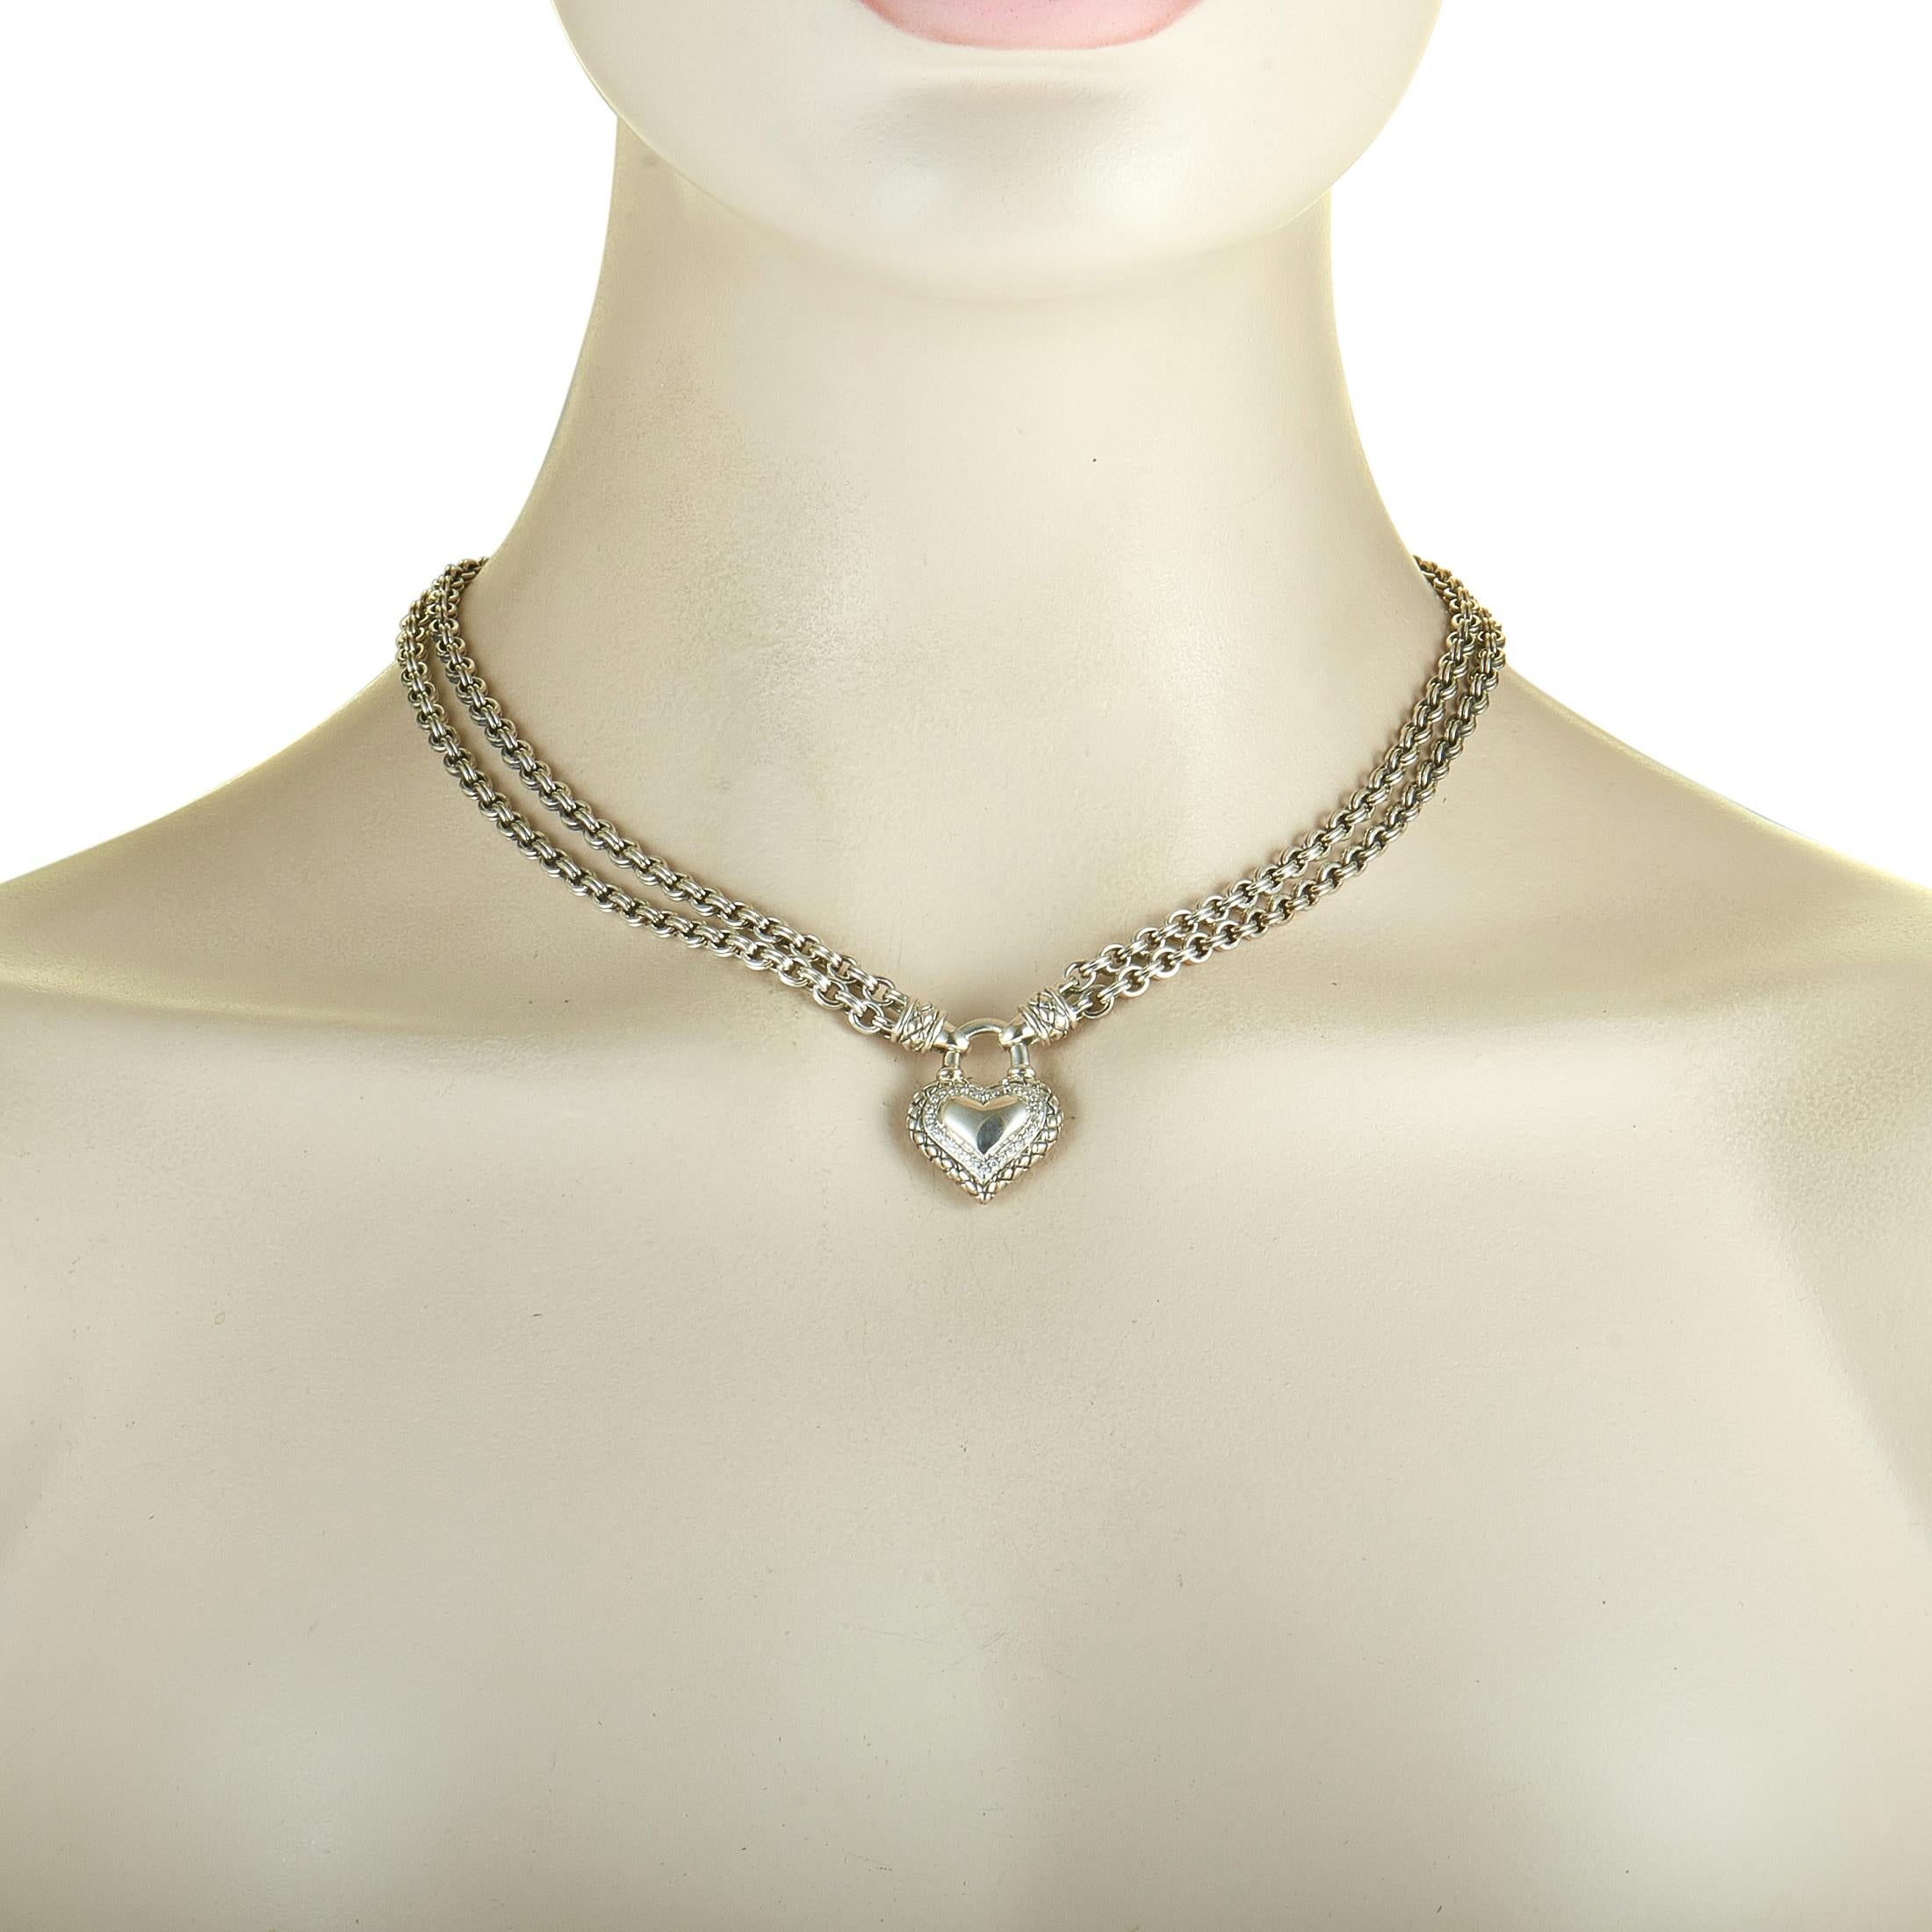 This Scott Kay necklace is made out of sterling silver and diamonds that amount to 0.15 carats. The necklace weighs 54.5 grams and measures 17” in length, boasting a 1” by 0.75” heart pendant.

Offered in brand new condition, this jewelry piece